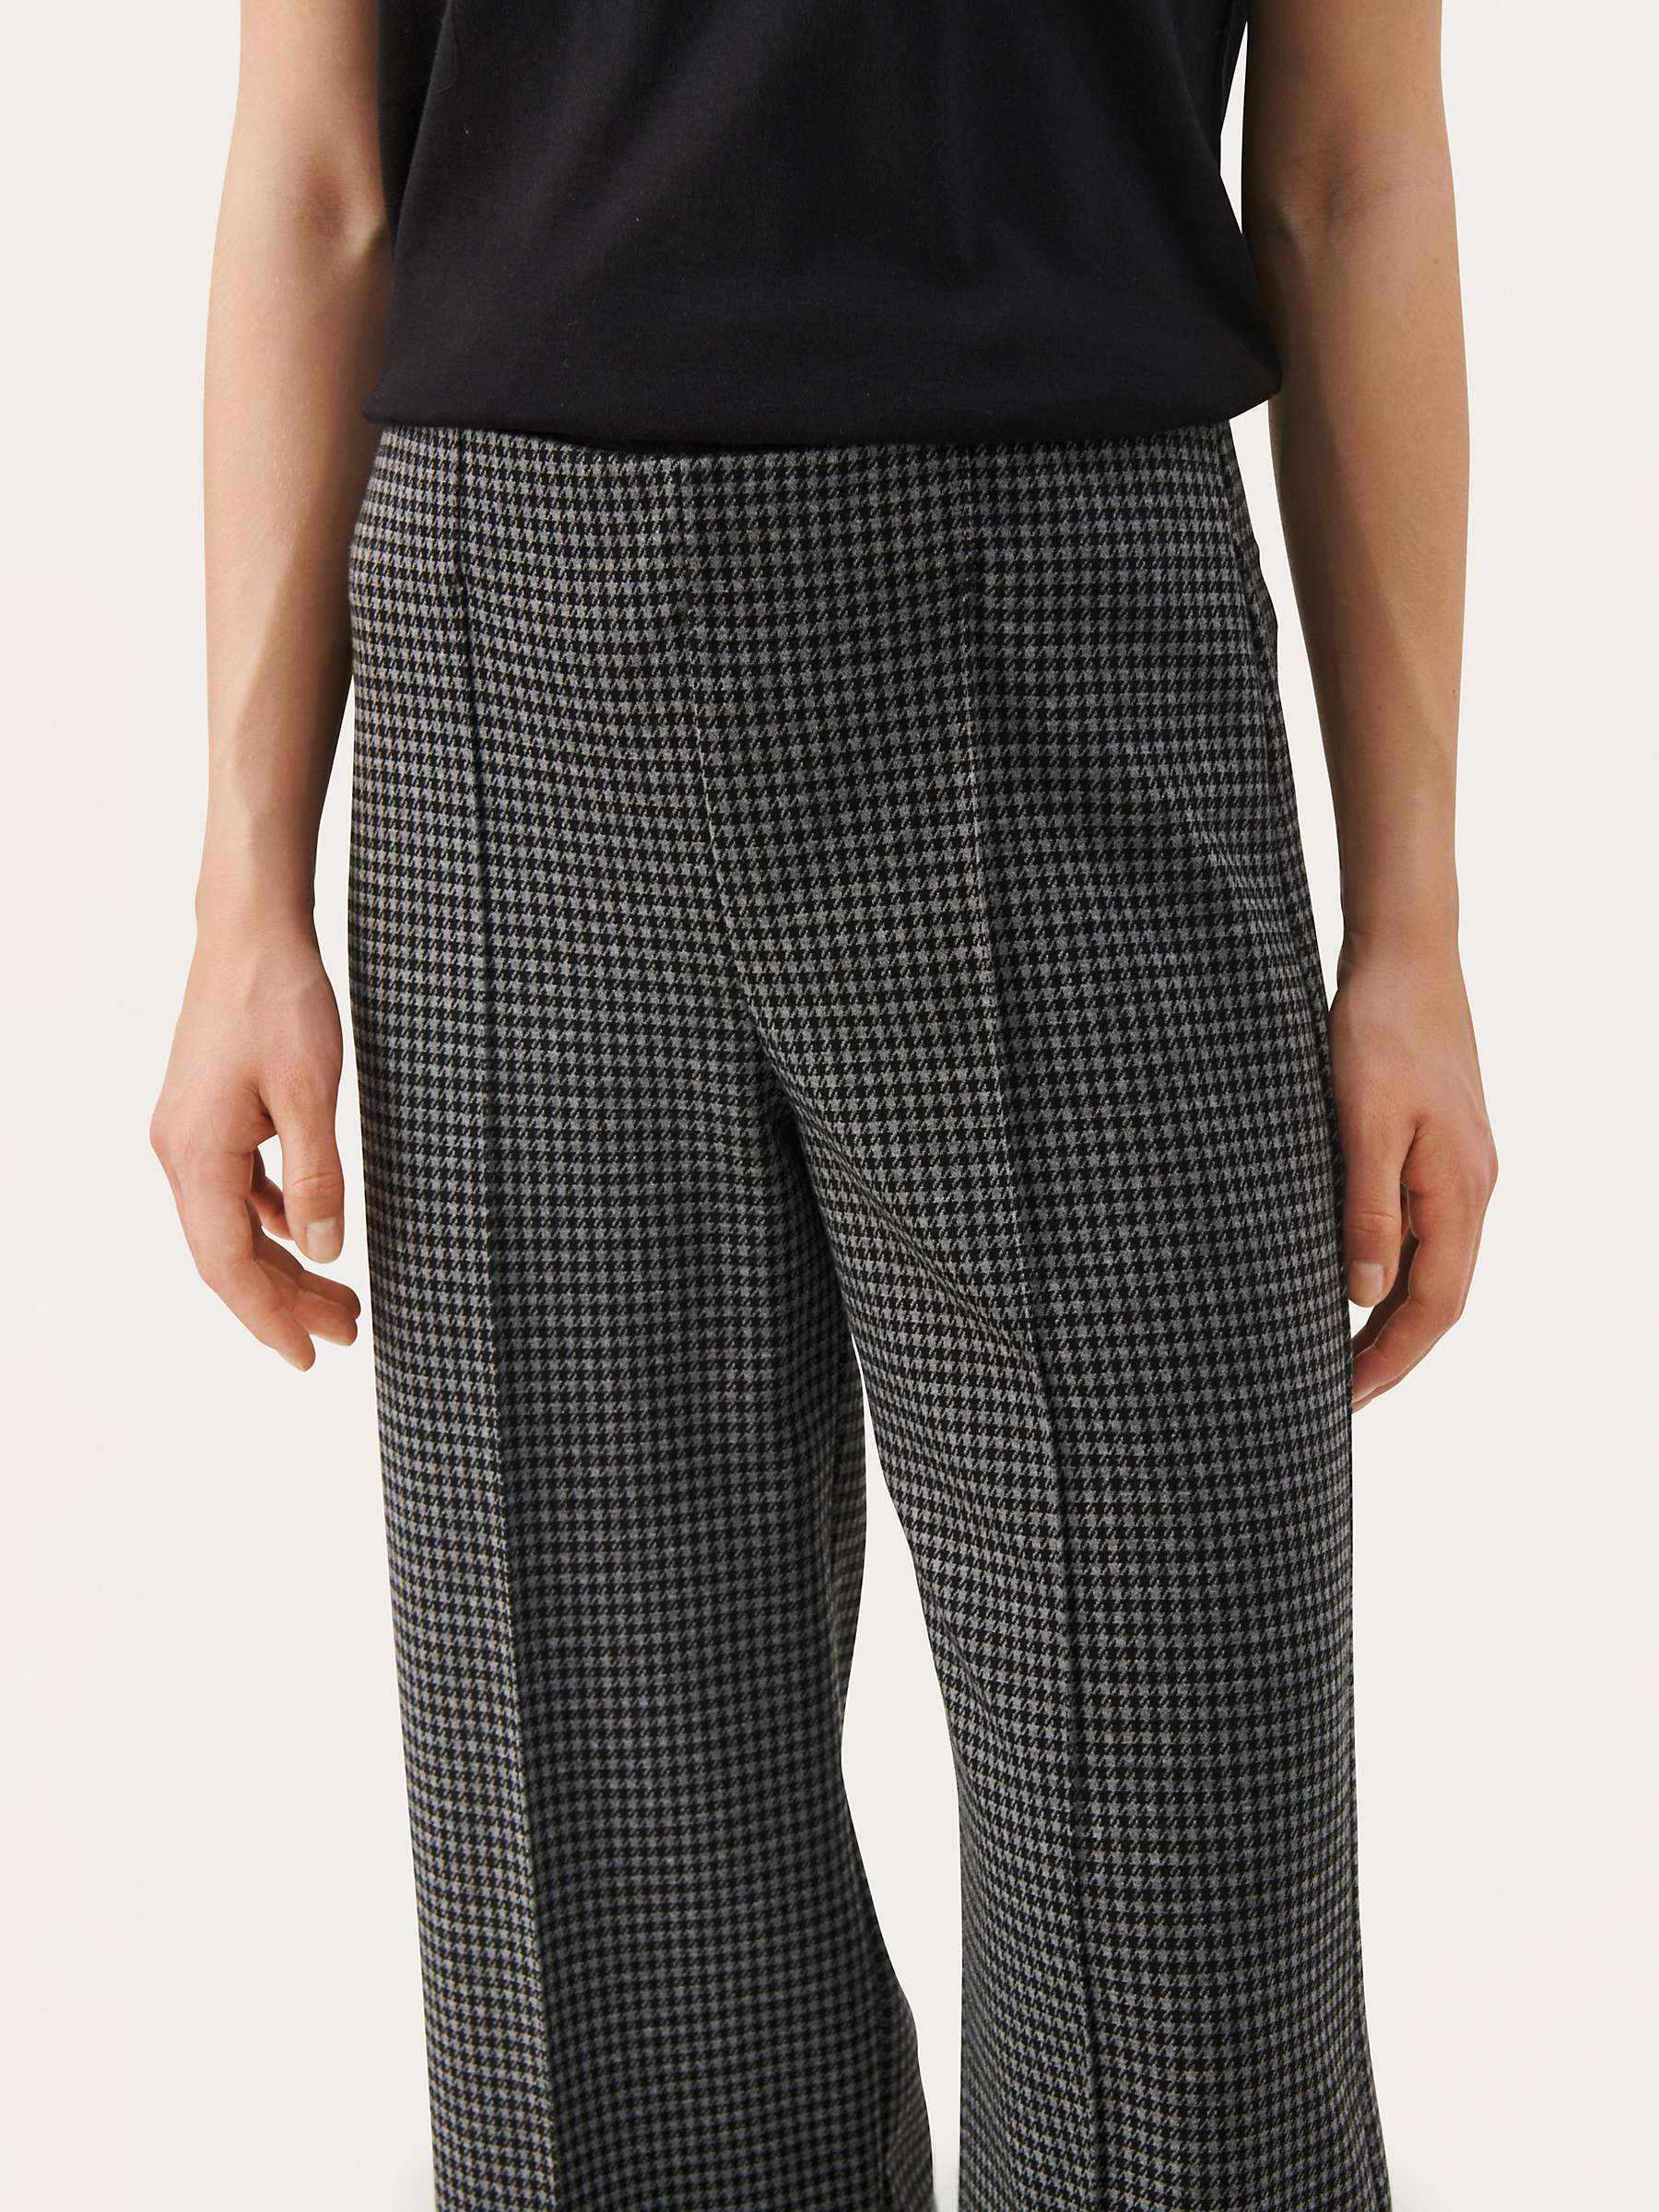 Buy Part Two Ilisan Cropped Check Trousers, Medium Grey Online at johnlewis.com